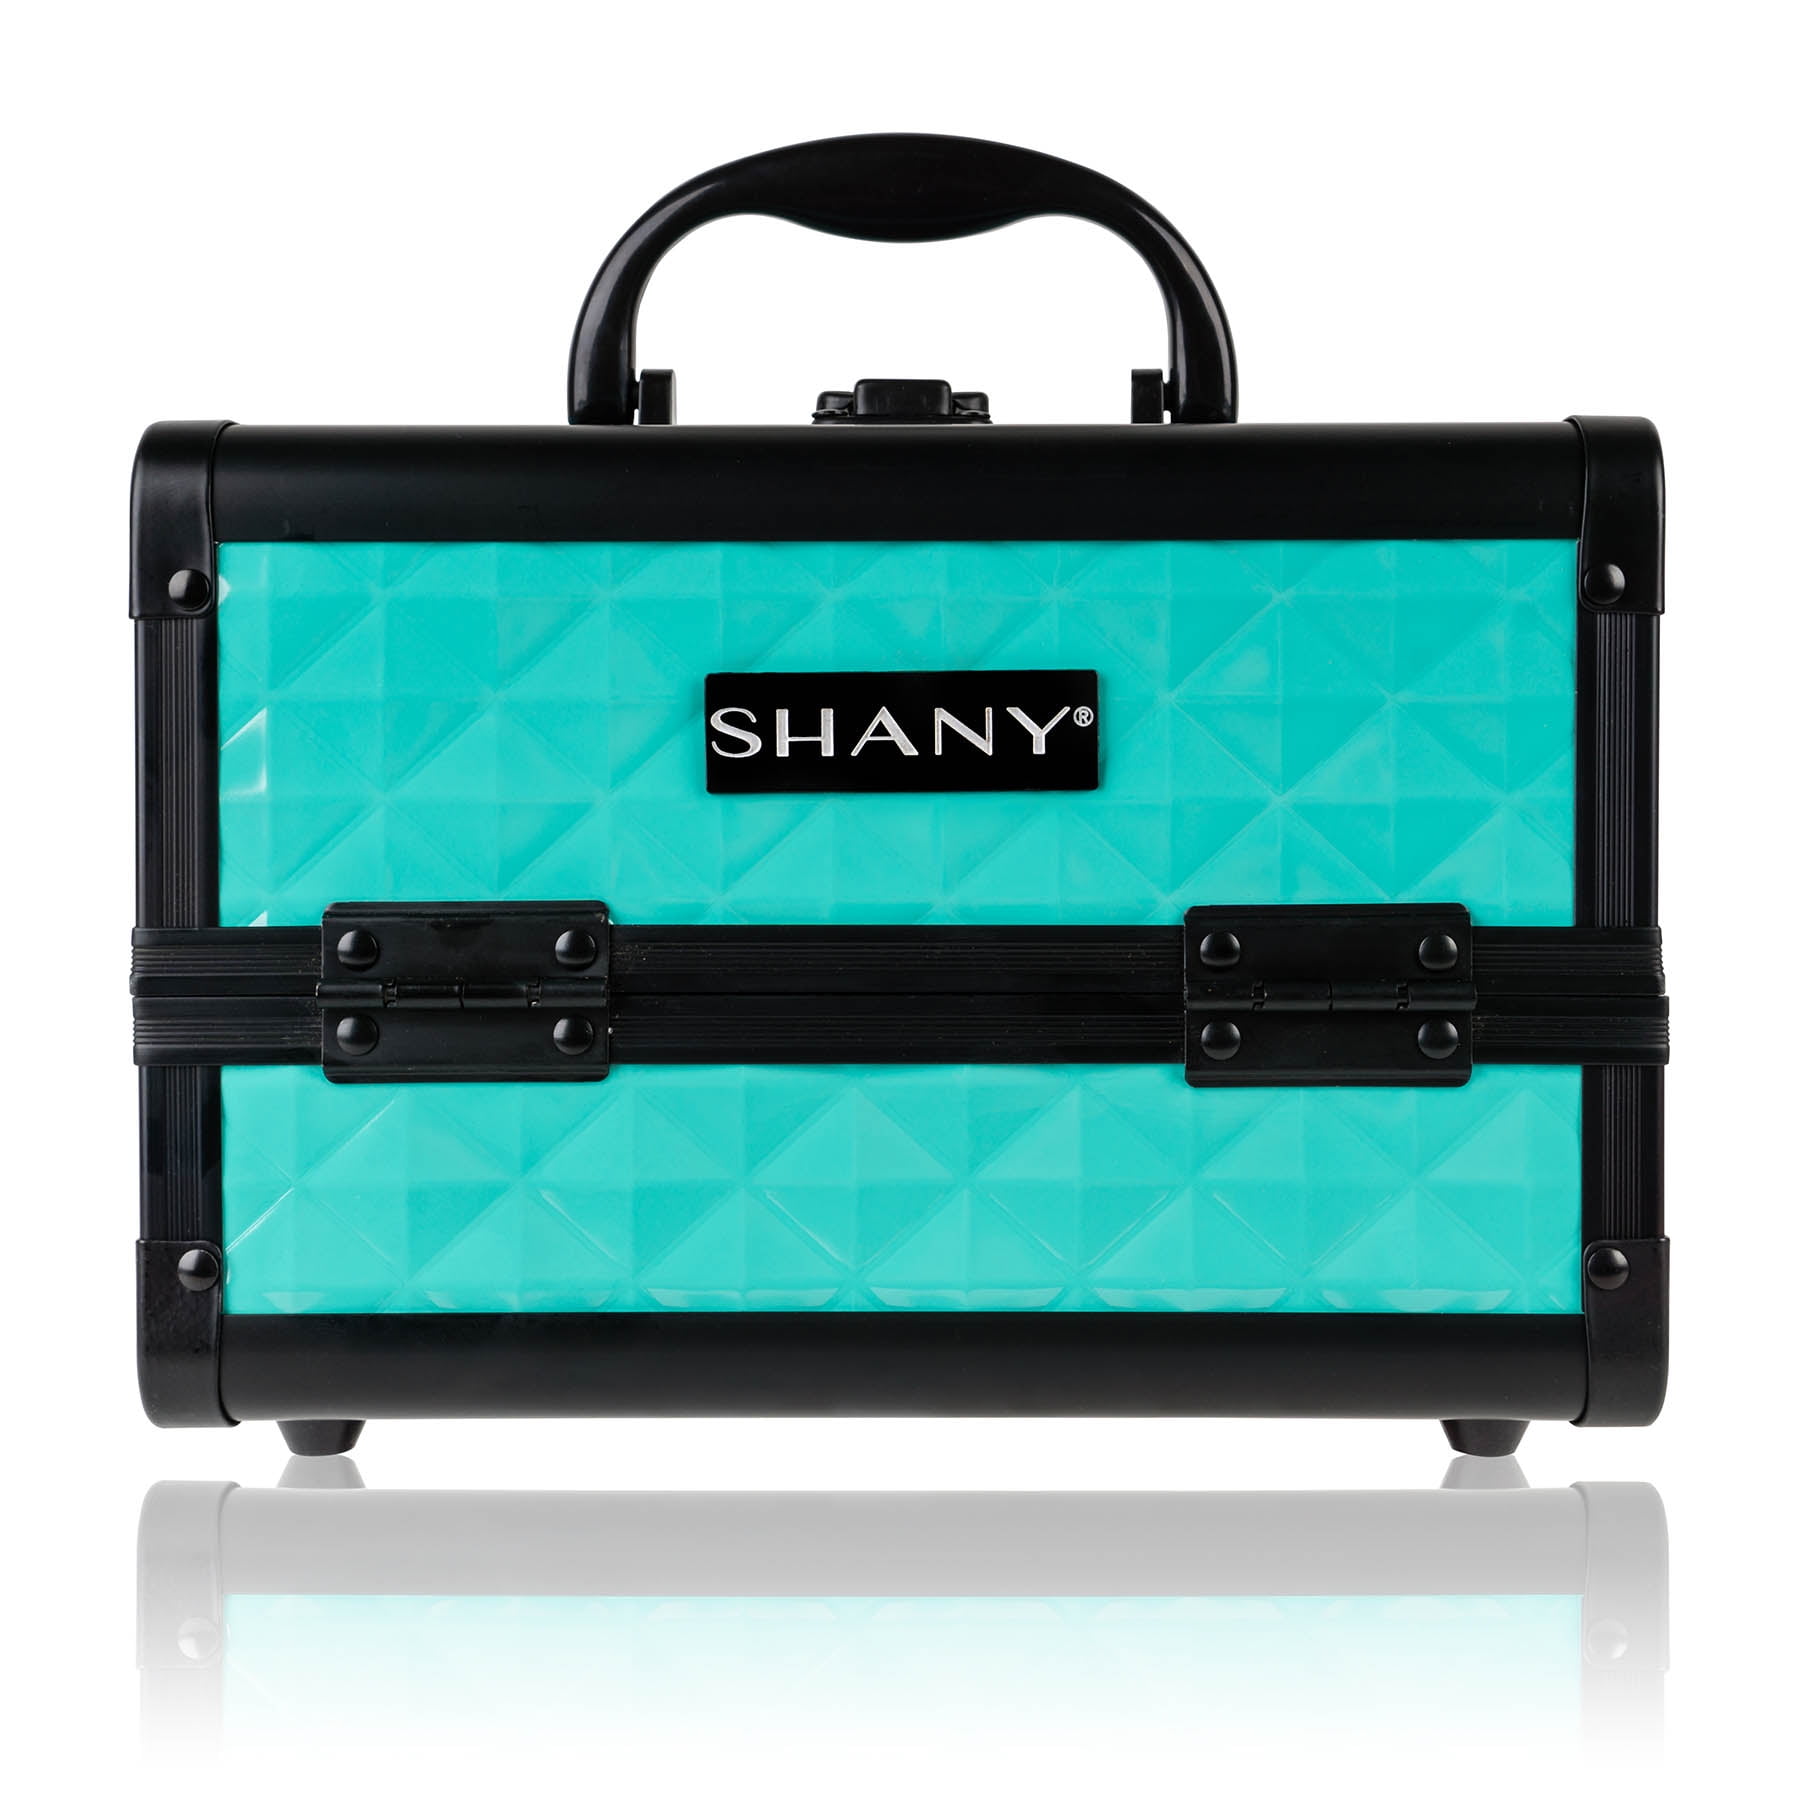 Cosmetics SHANY Portable Multi storage Case Box with Beauty , Mirror Makeup Makeup Organizer Chic Train with - Storage trays Makeup Locks Turquoise Case Box Cosmetic Jewelry Makeup